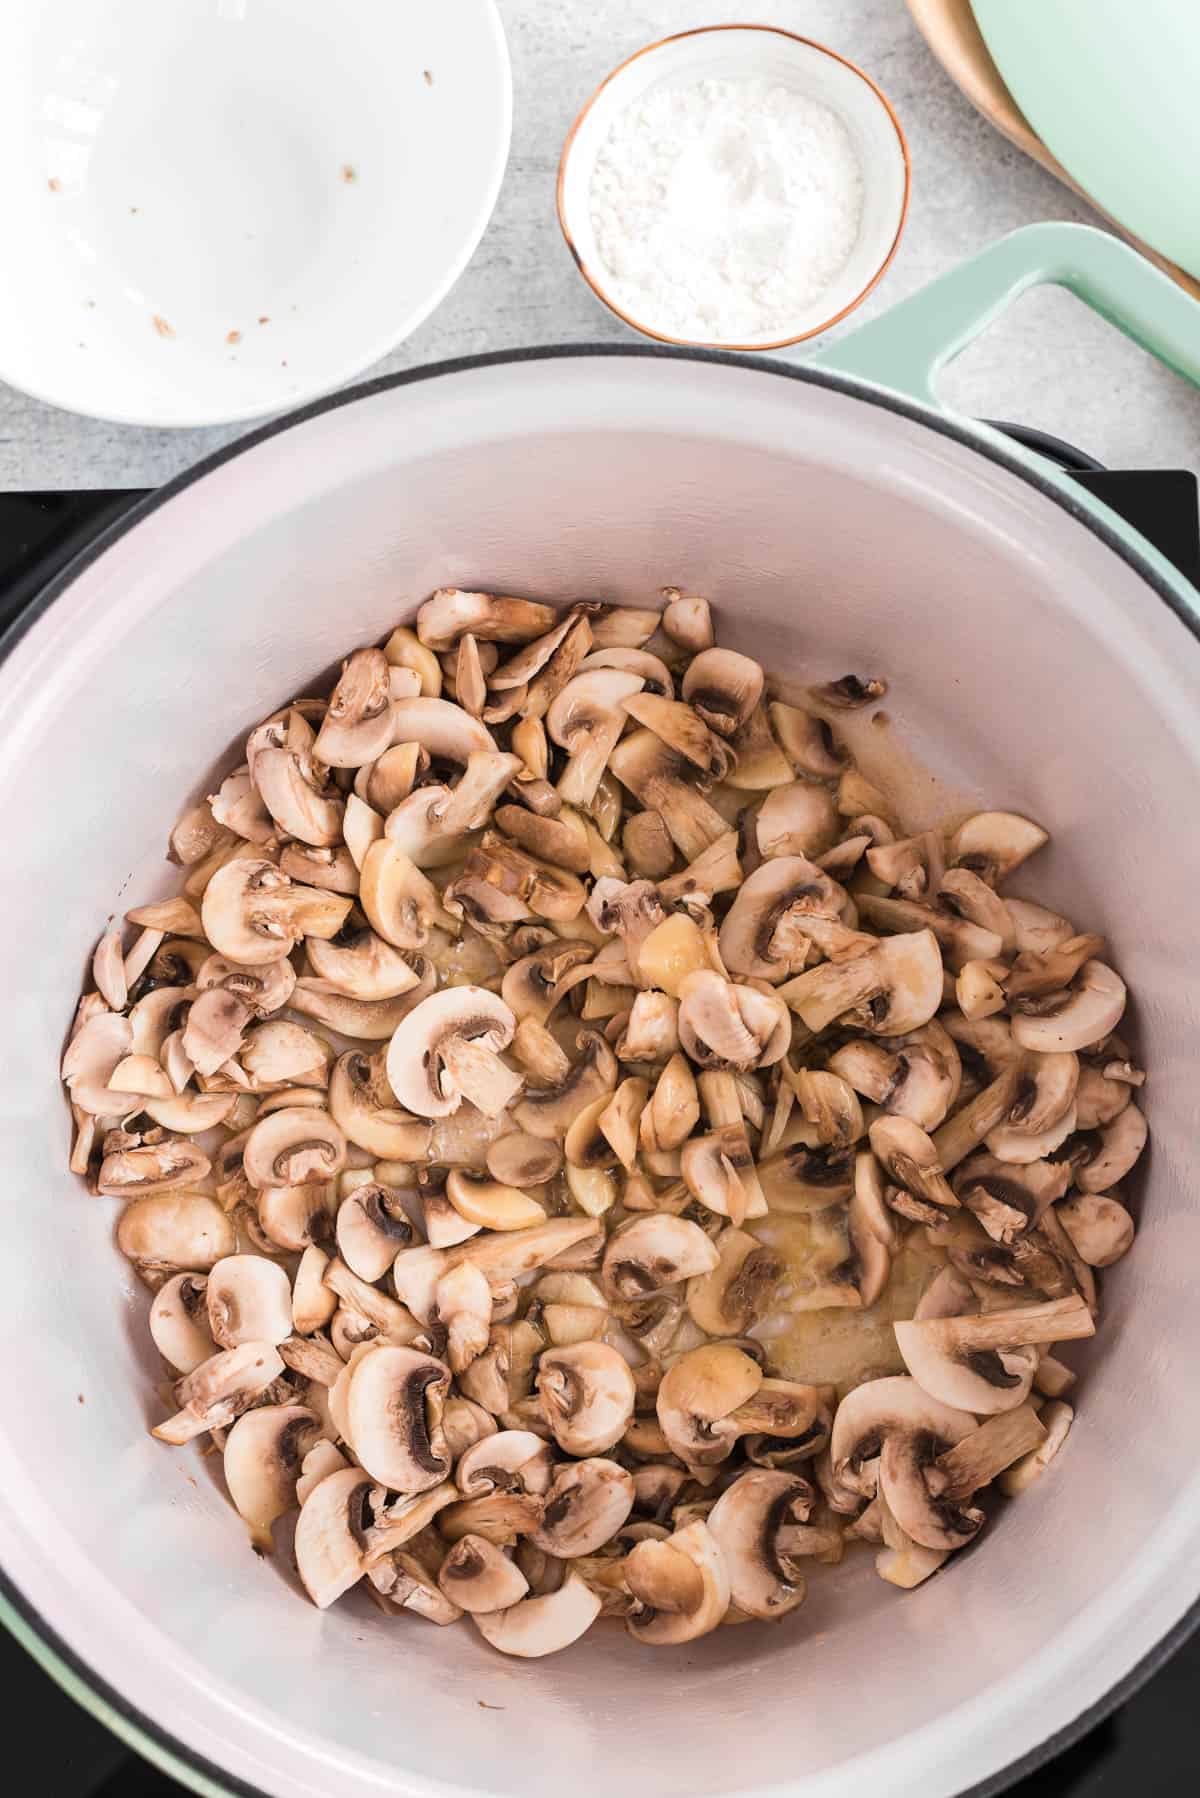 cooking sliced mushrooms in melted butter.